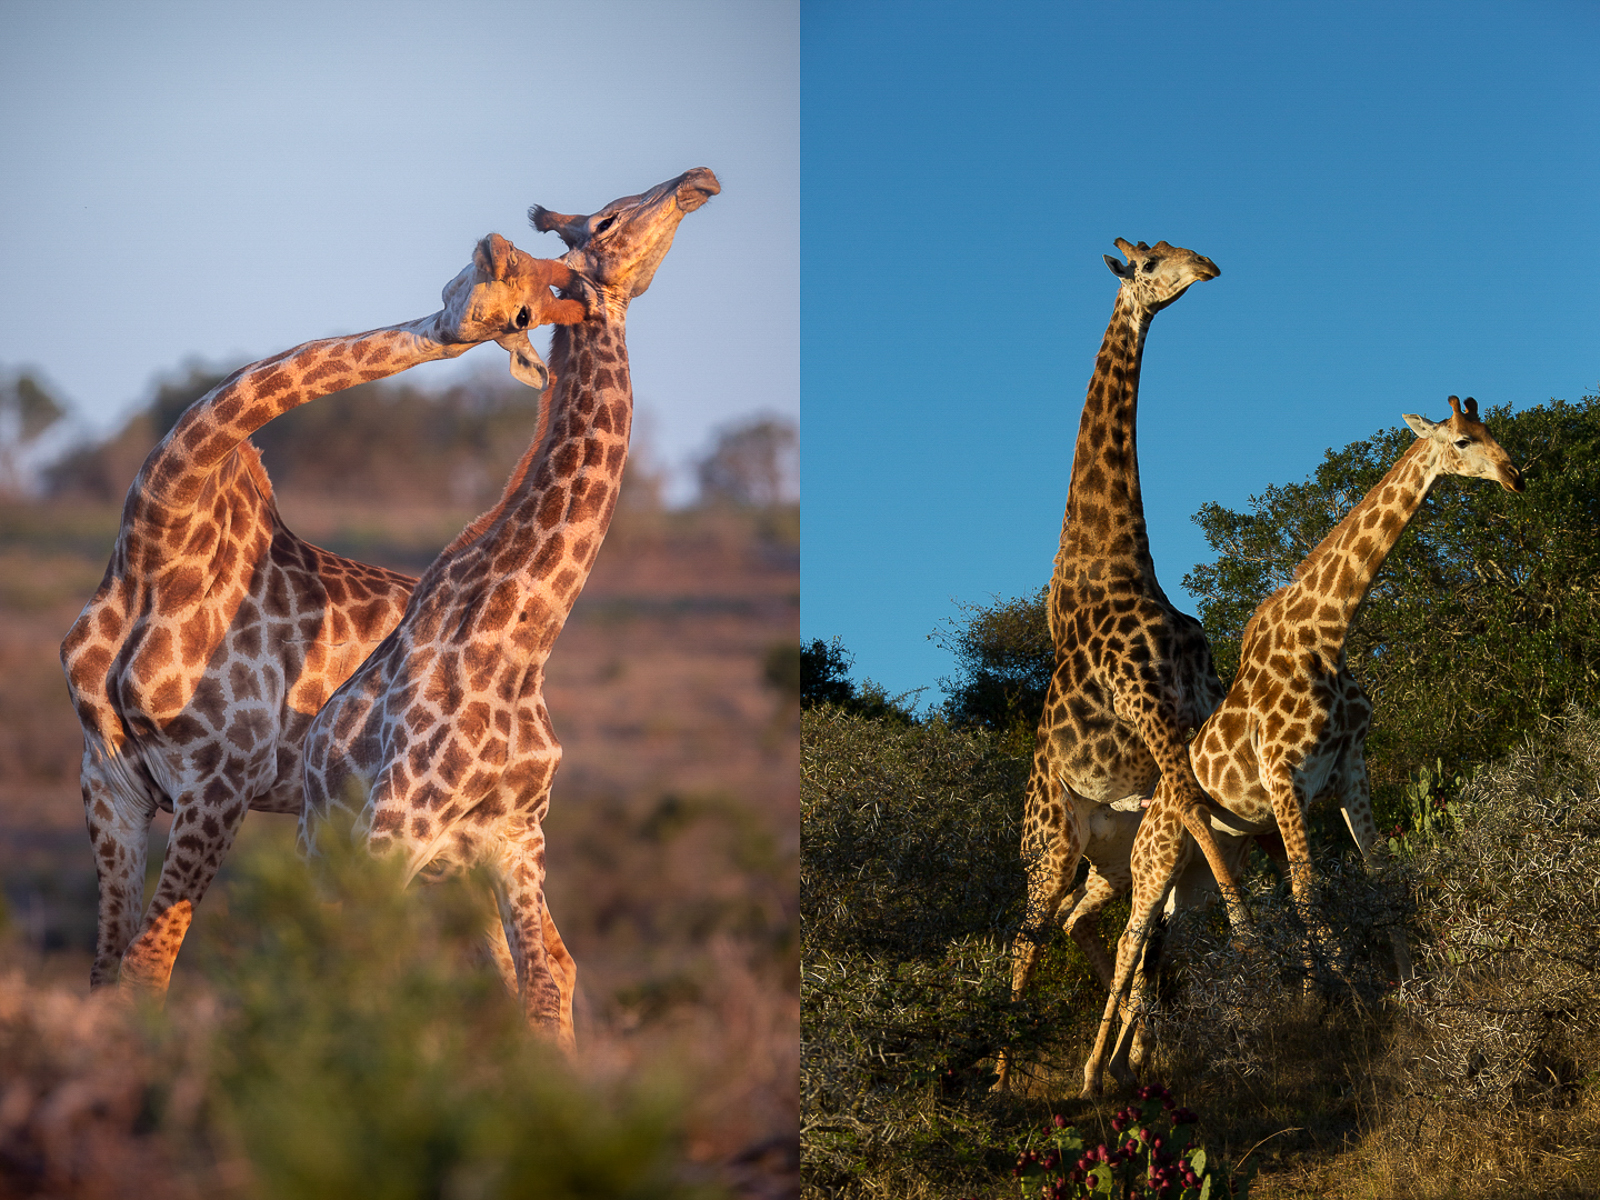 Iconic African Giraffe mating and necking